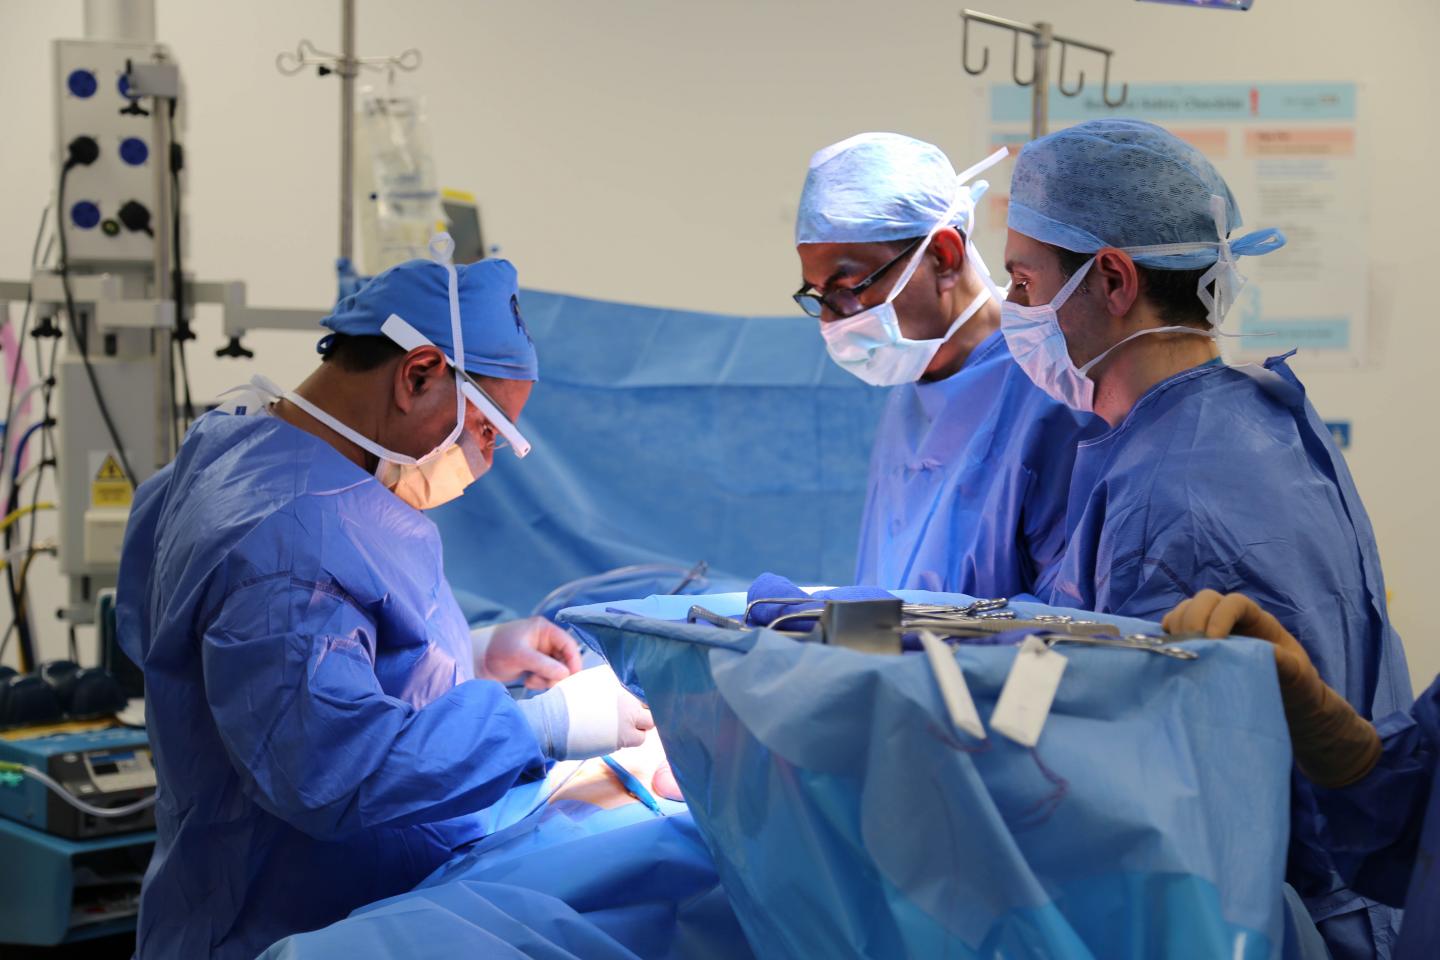 Shafi Ahmed Uses Google Glass during a Live Surgical Procedure (1 of 2)